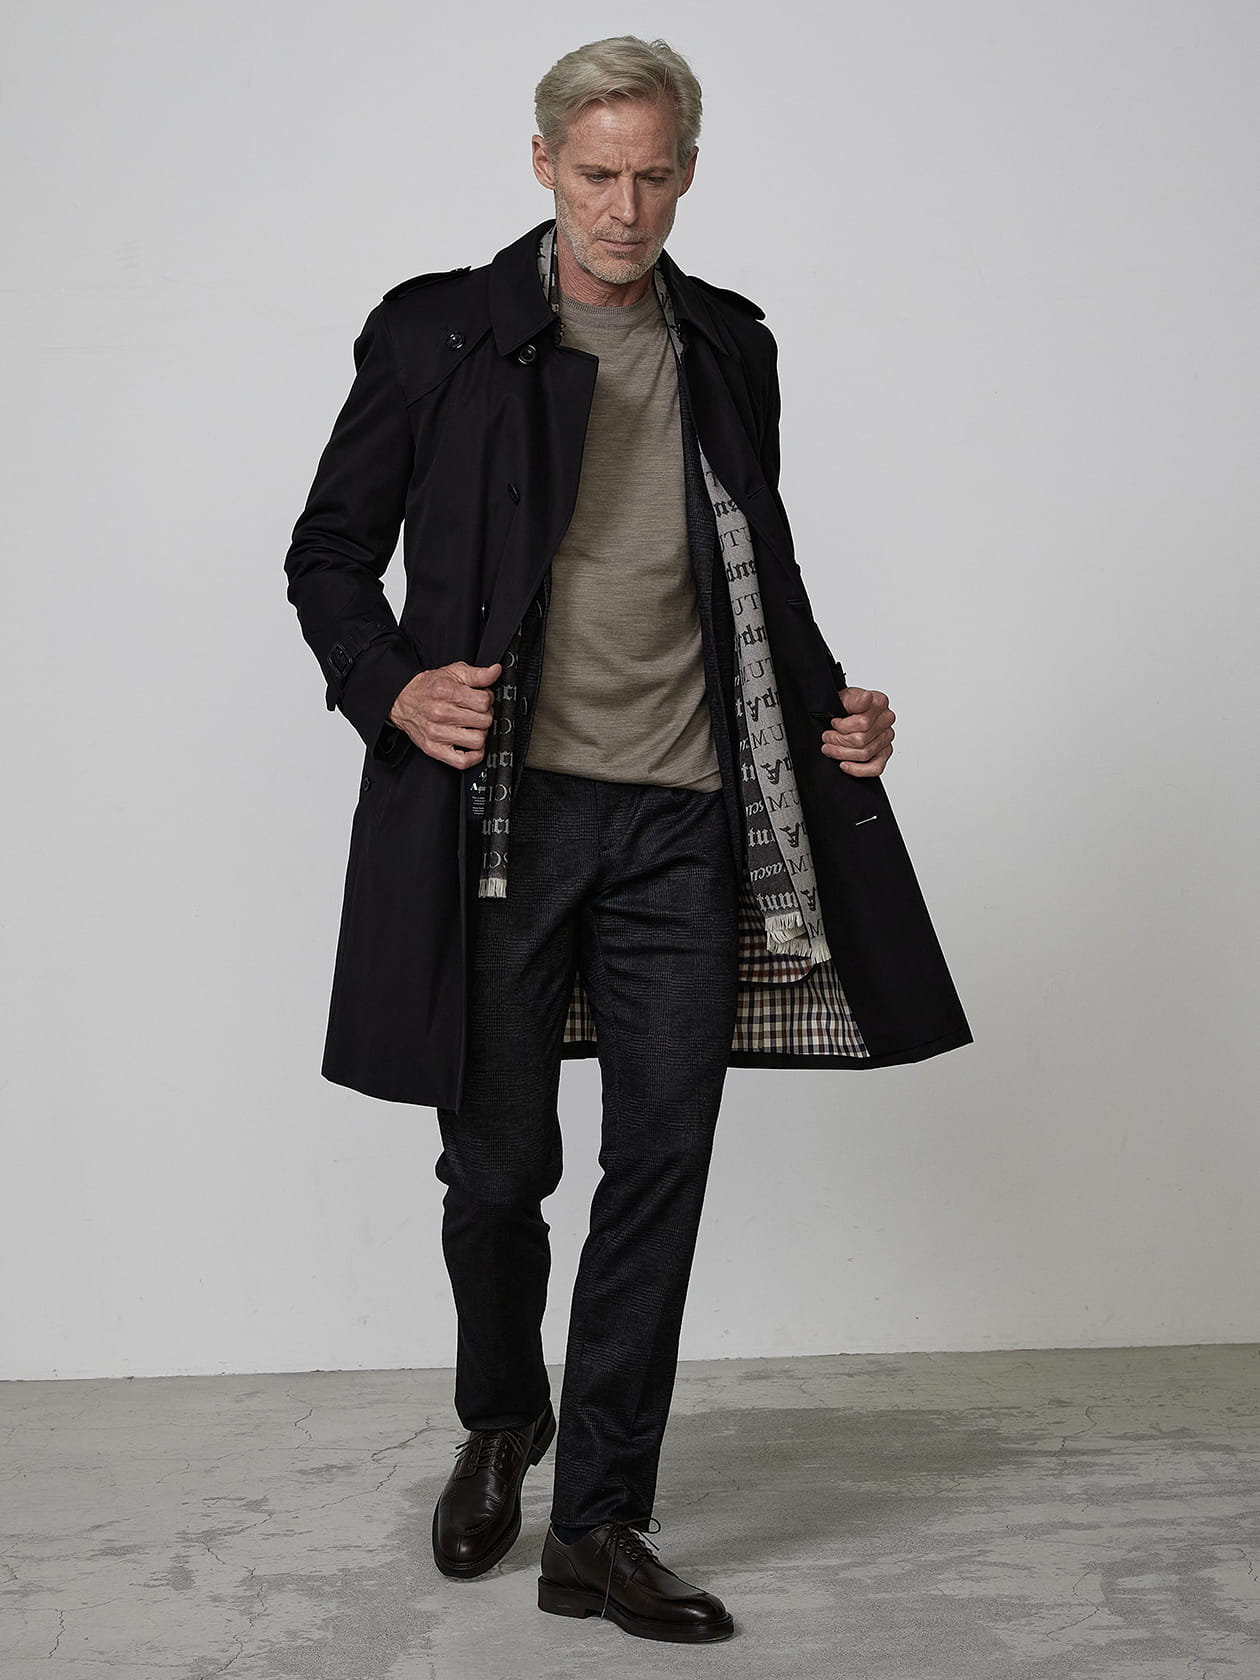 CURTIS SINGLE TRENCH COAT